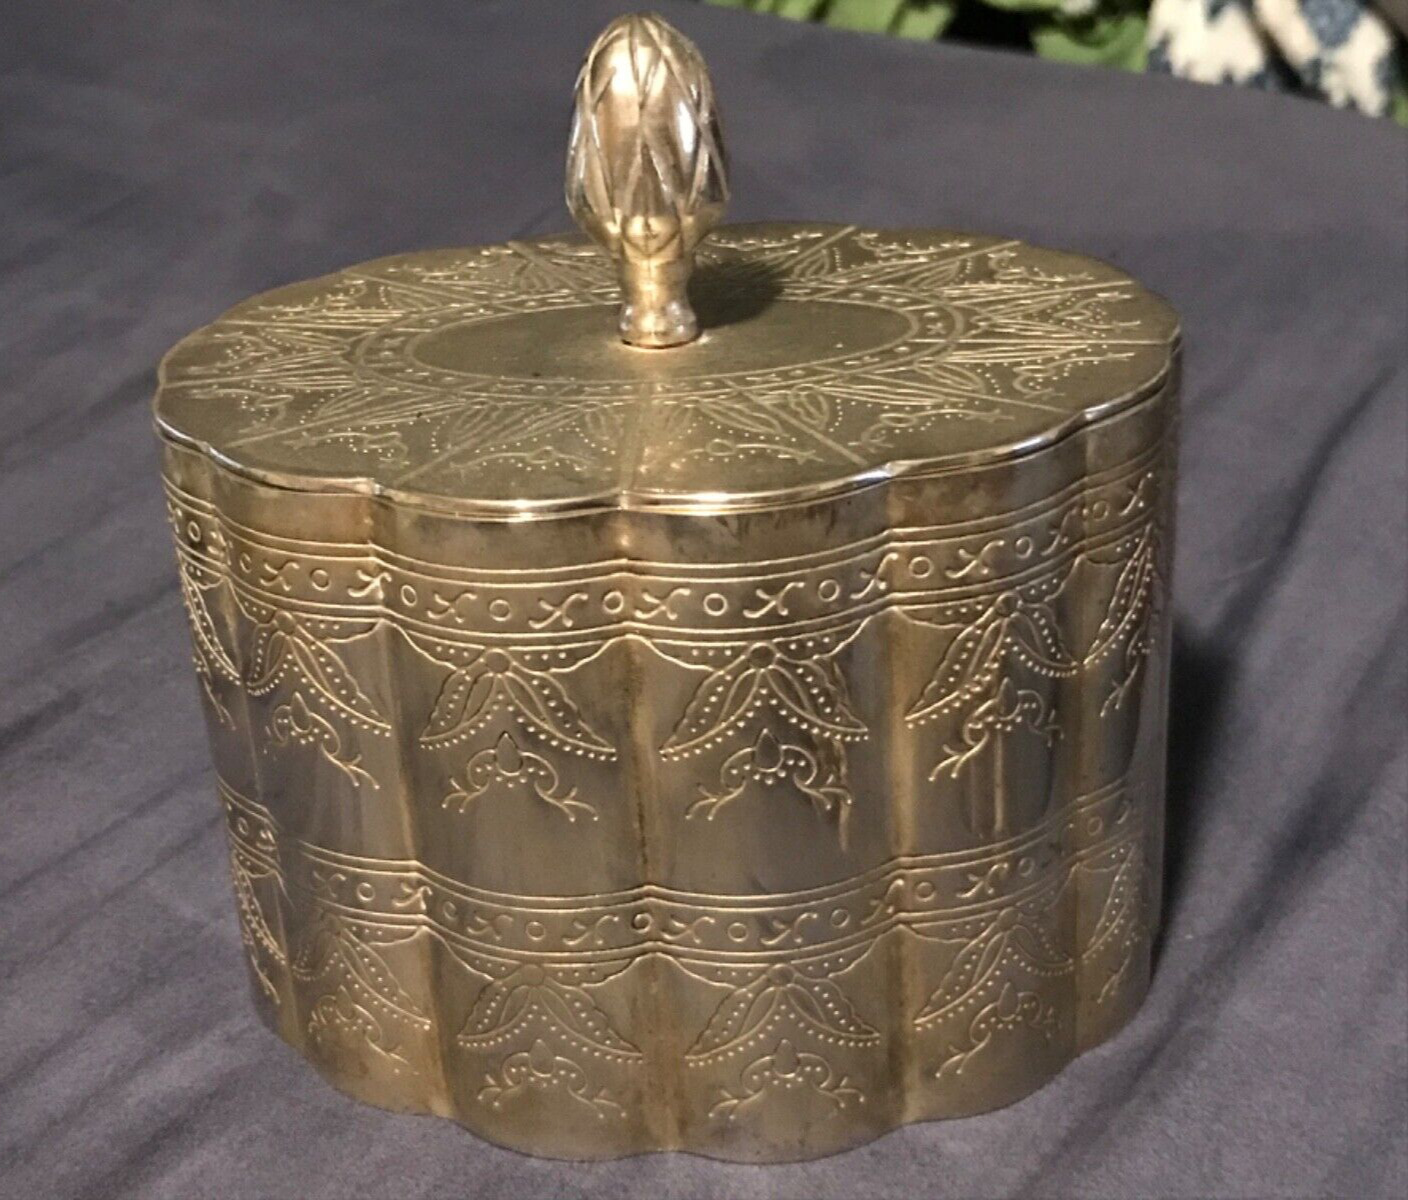 Vintage International Silver Company Plated Engraved Trinket Box Fair Unlined